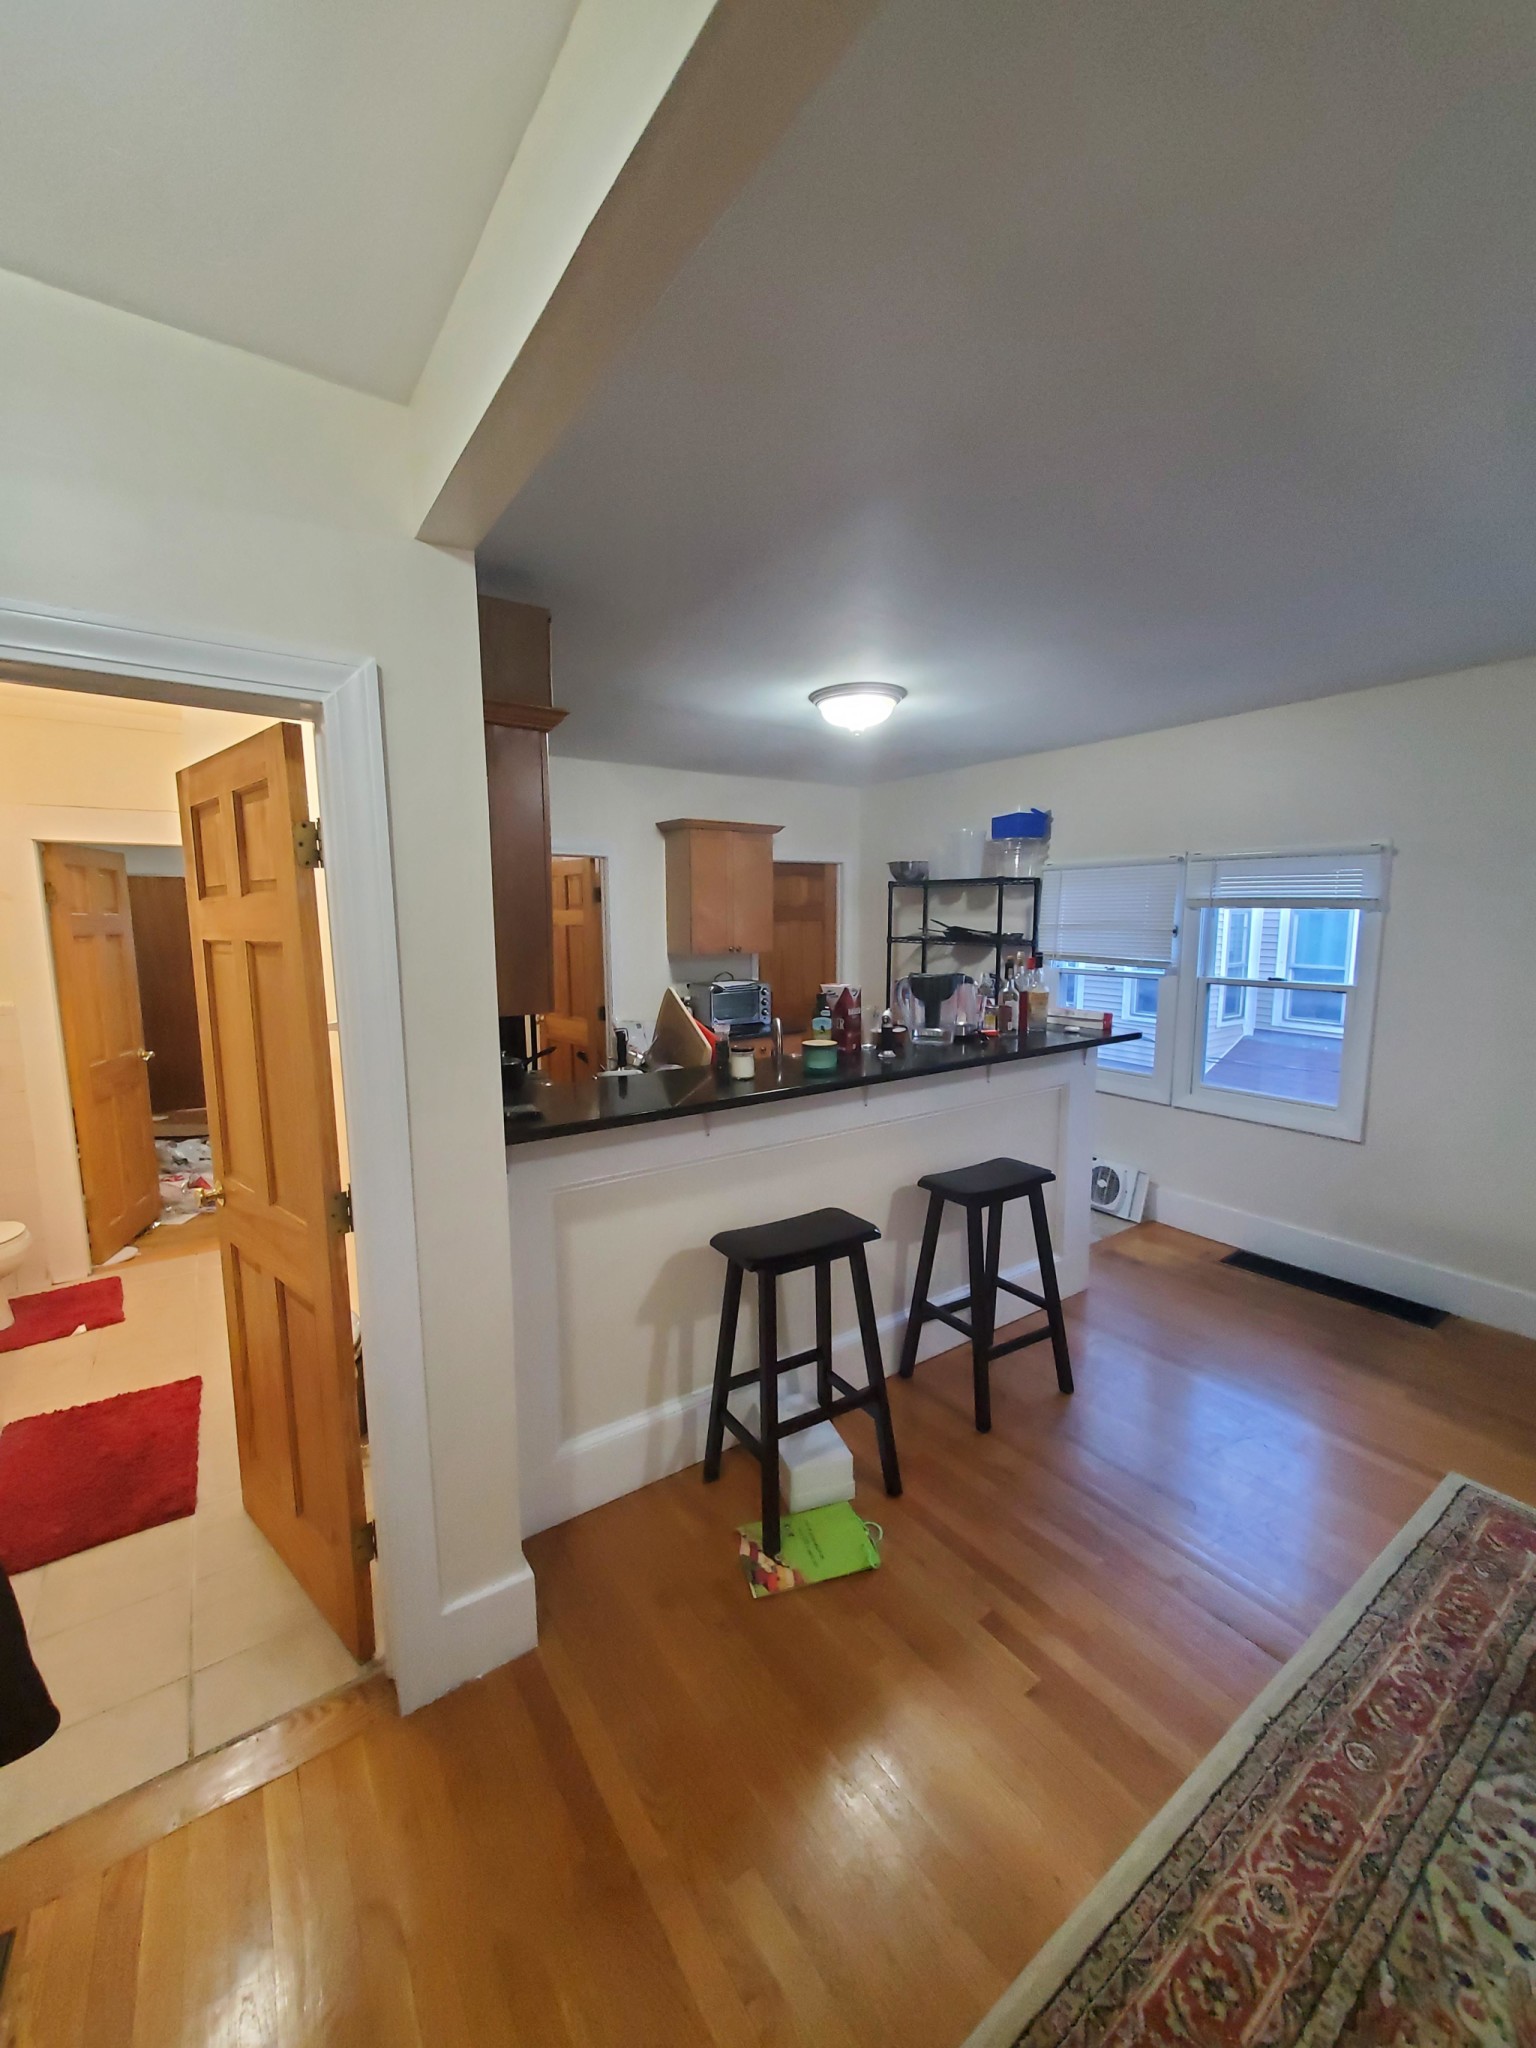 Photos of apartment on Dimick St.,Somerville MA 02143